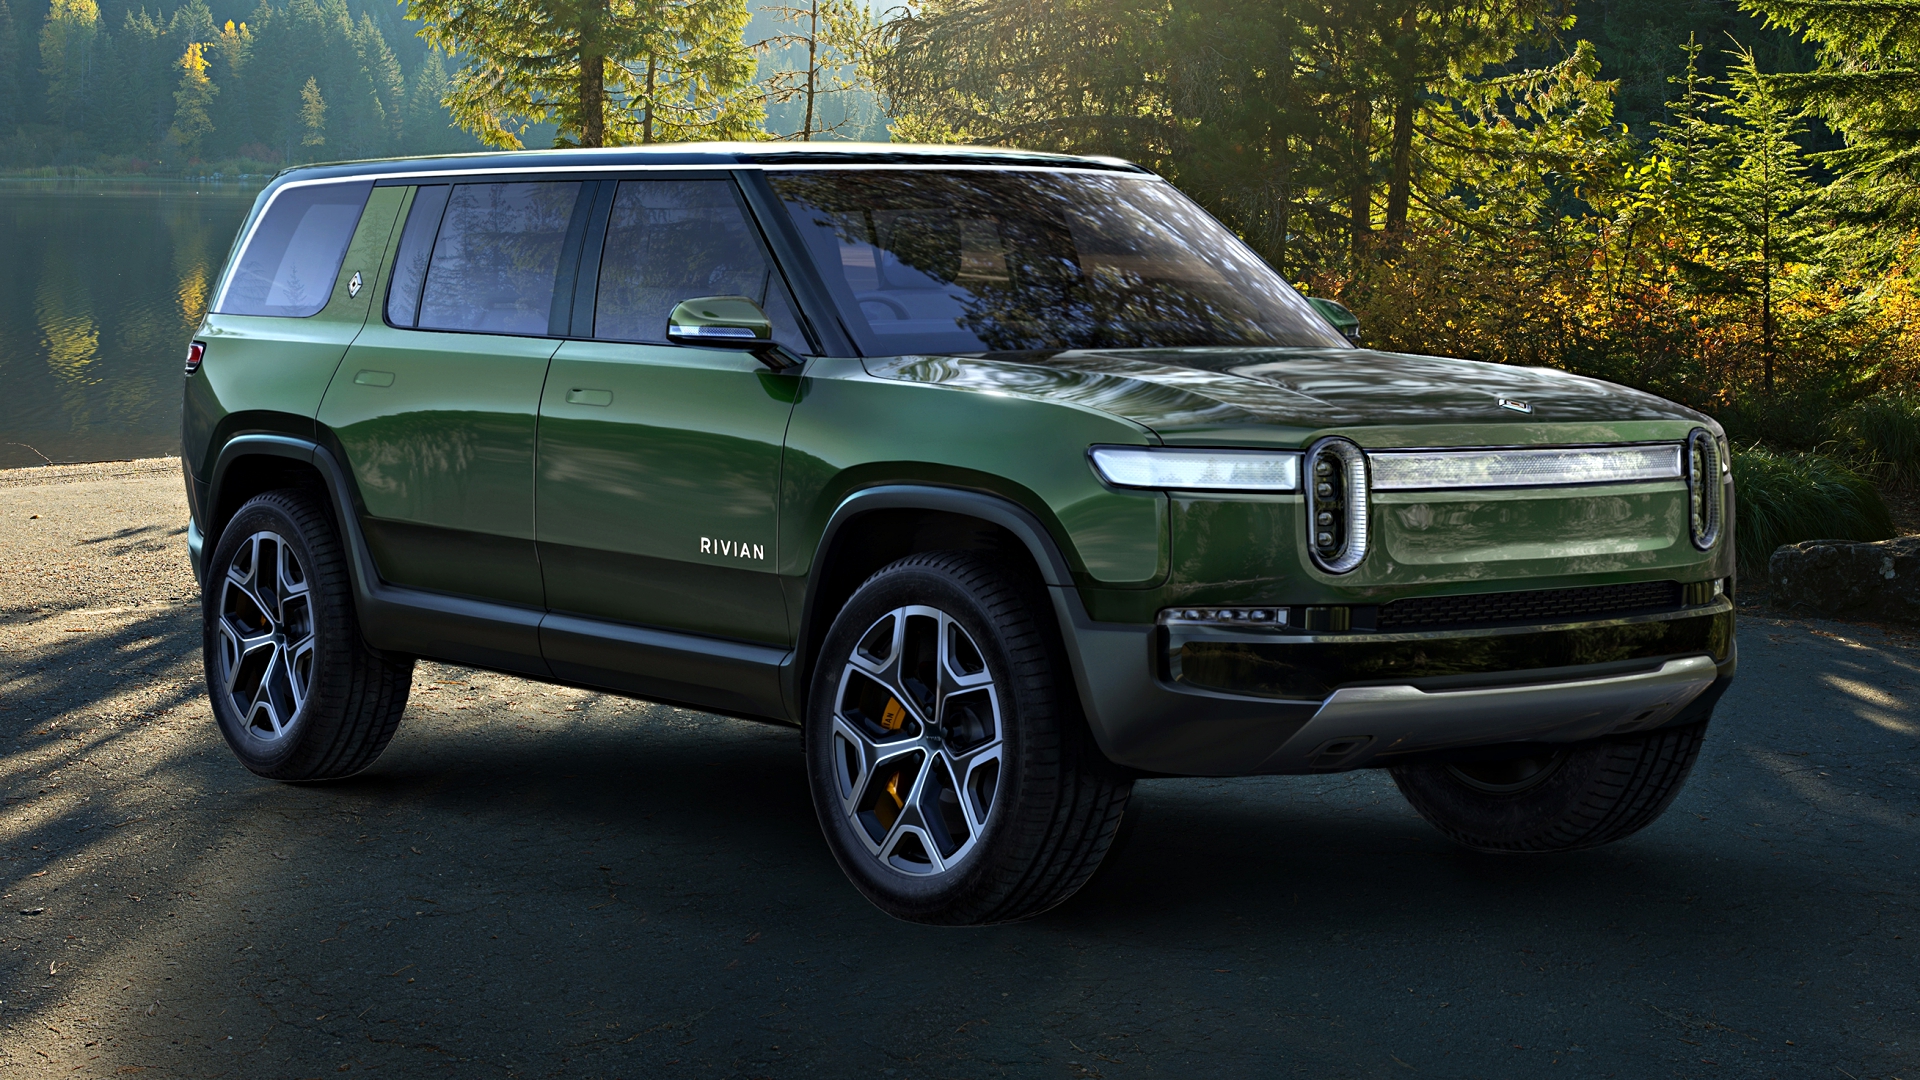 News - Rivian Continues EV Upset With R1S SUV